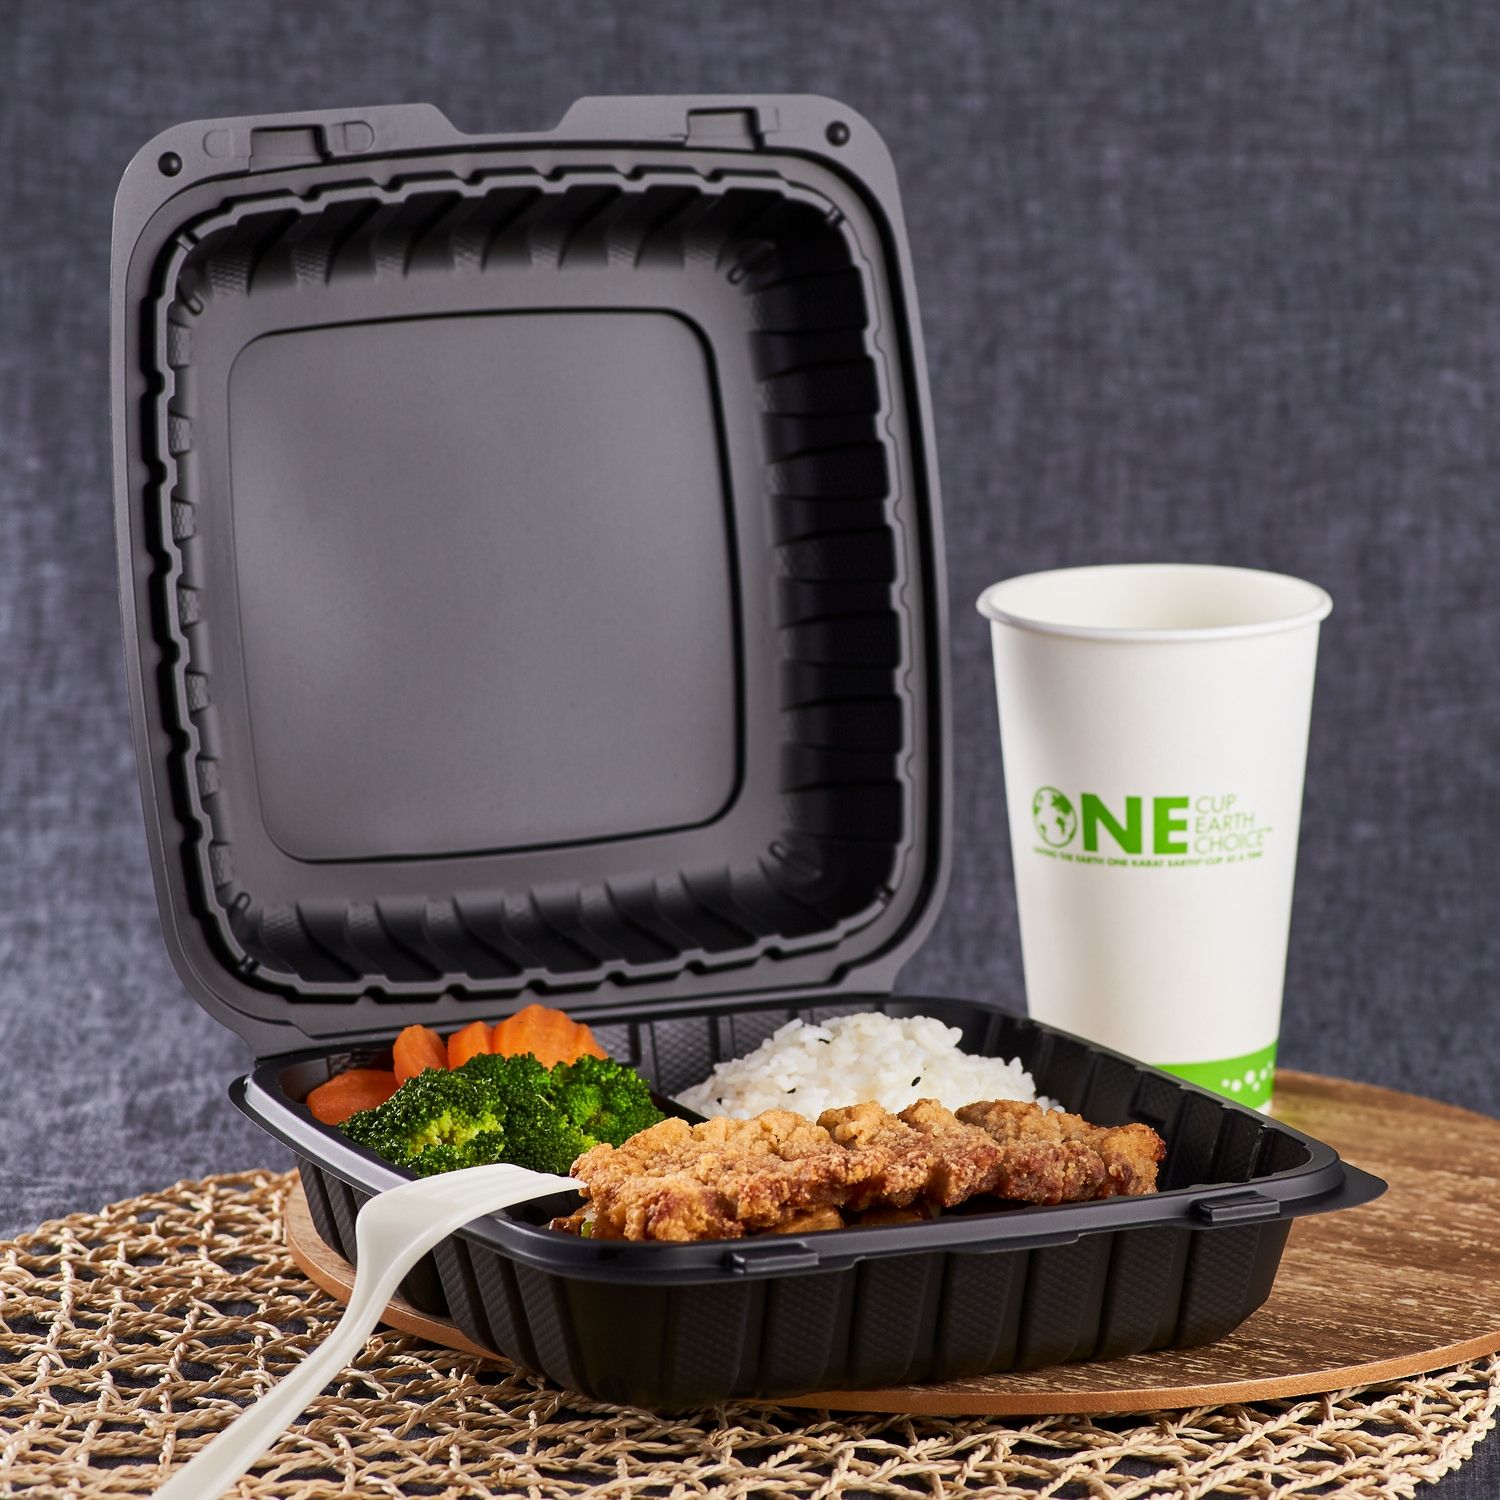 Restaurantware Thermo Tek 9 x 6 x 3 inch Mineral-Filled Take Out Containers, 100 Durable to Go Containers - Heavy-Duty, Disposable, Black Plastic